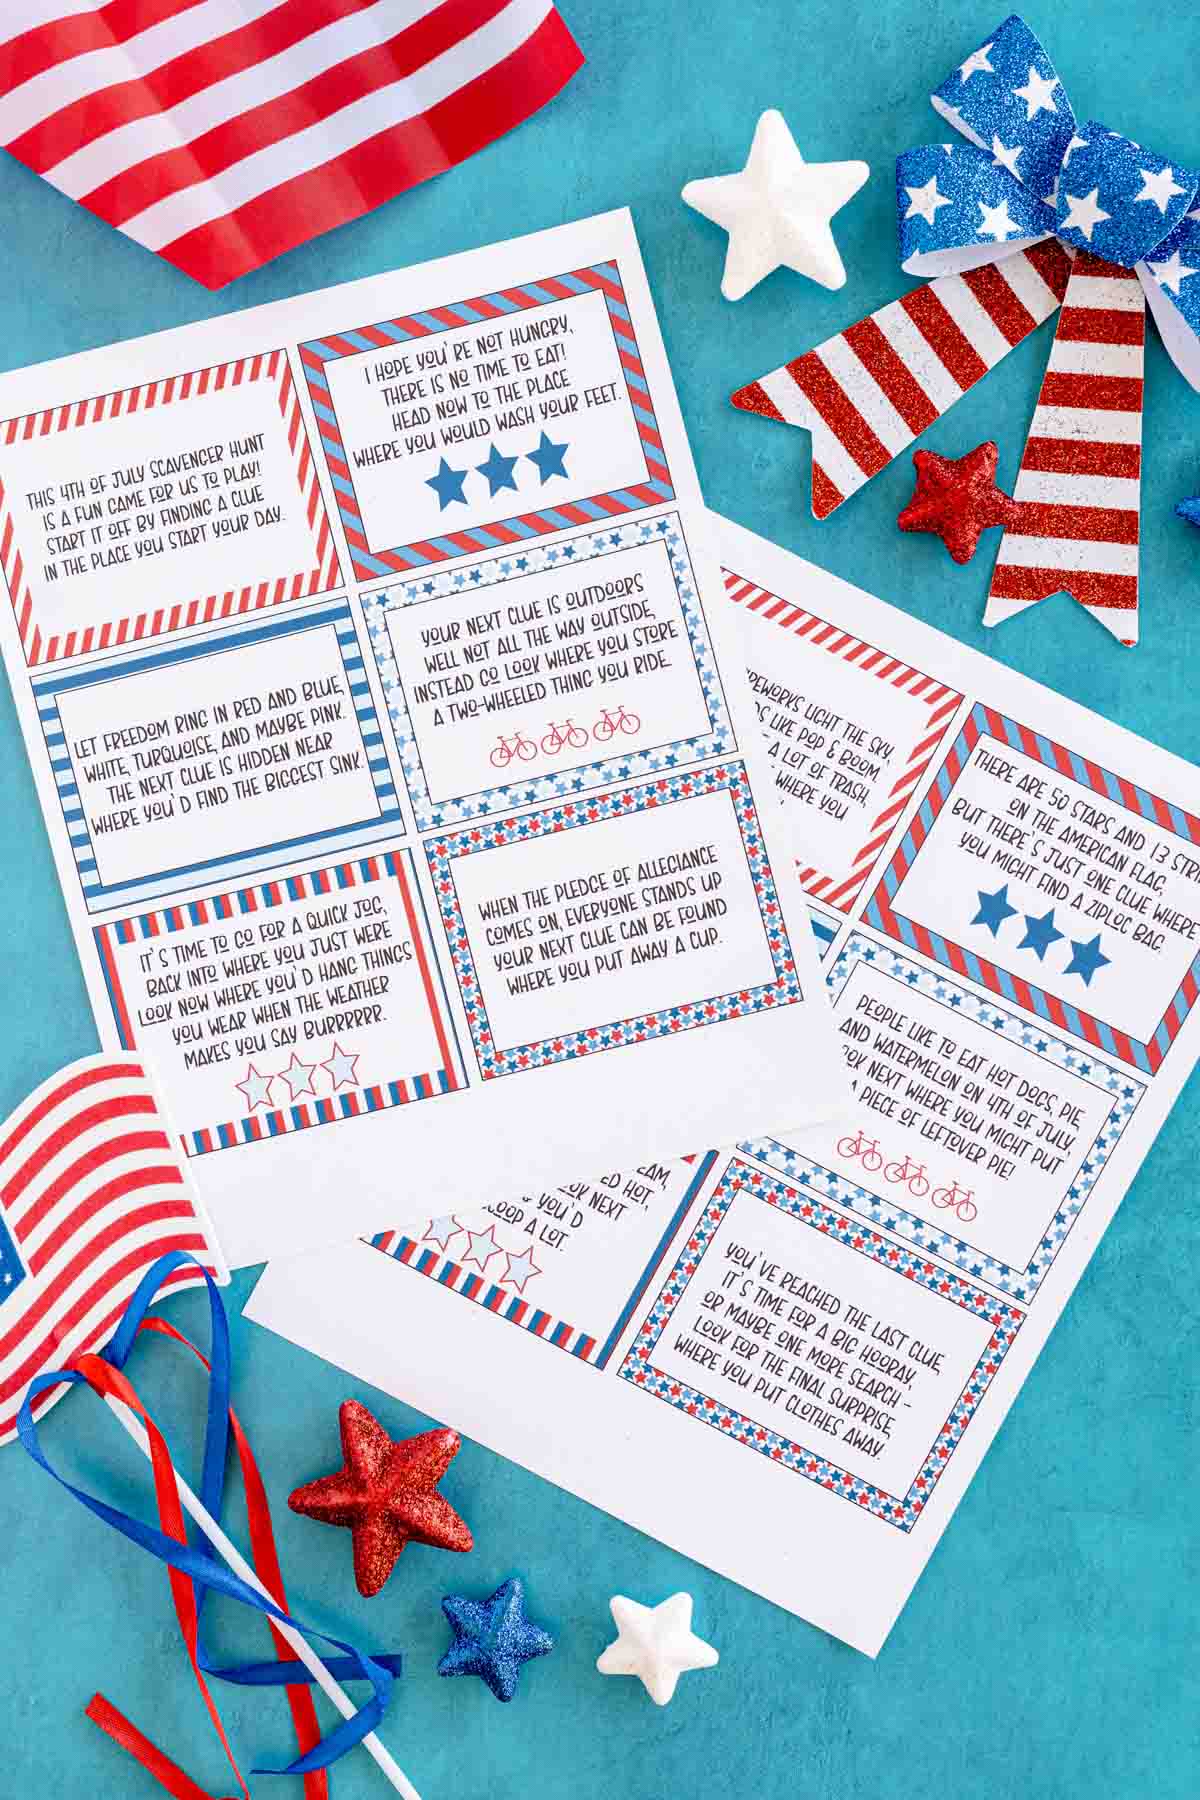 printed out 4th of July scavenger hunt clues